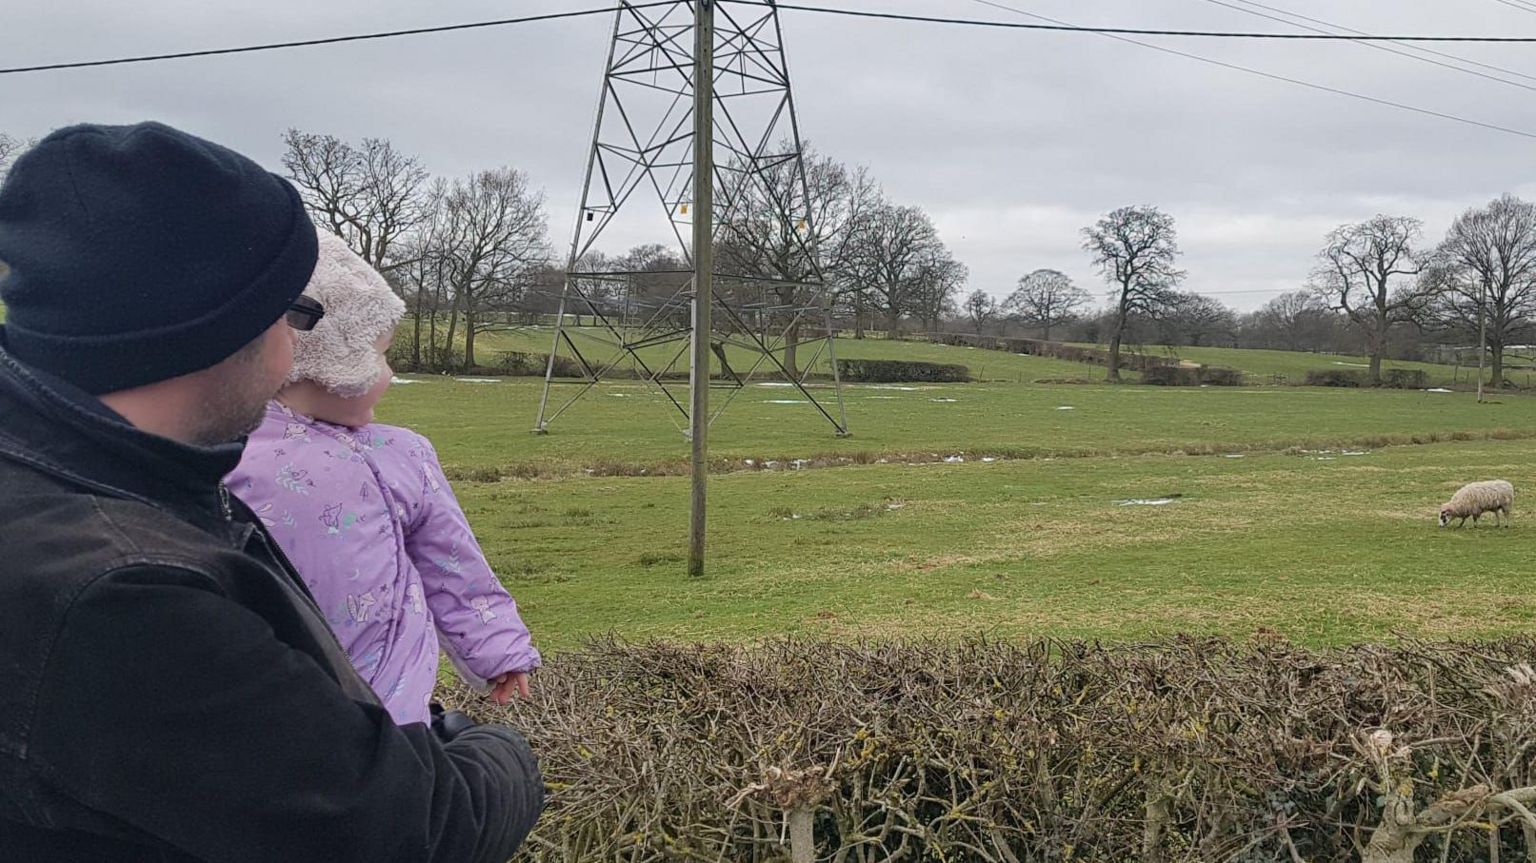 The back of a man holding a baby looking out to a field containing a sheep and a pylon.